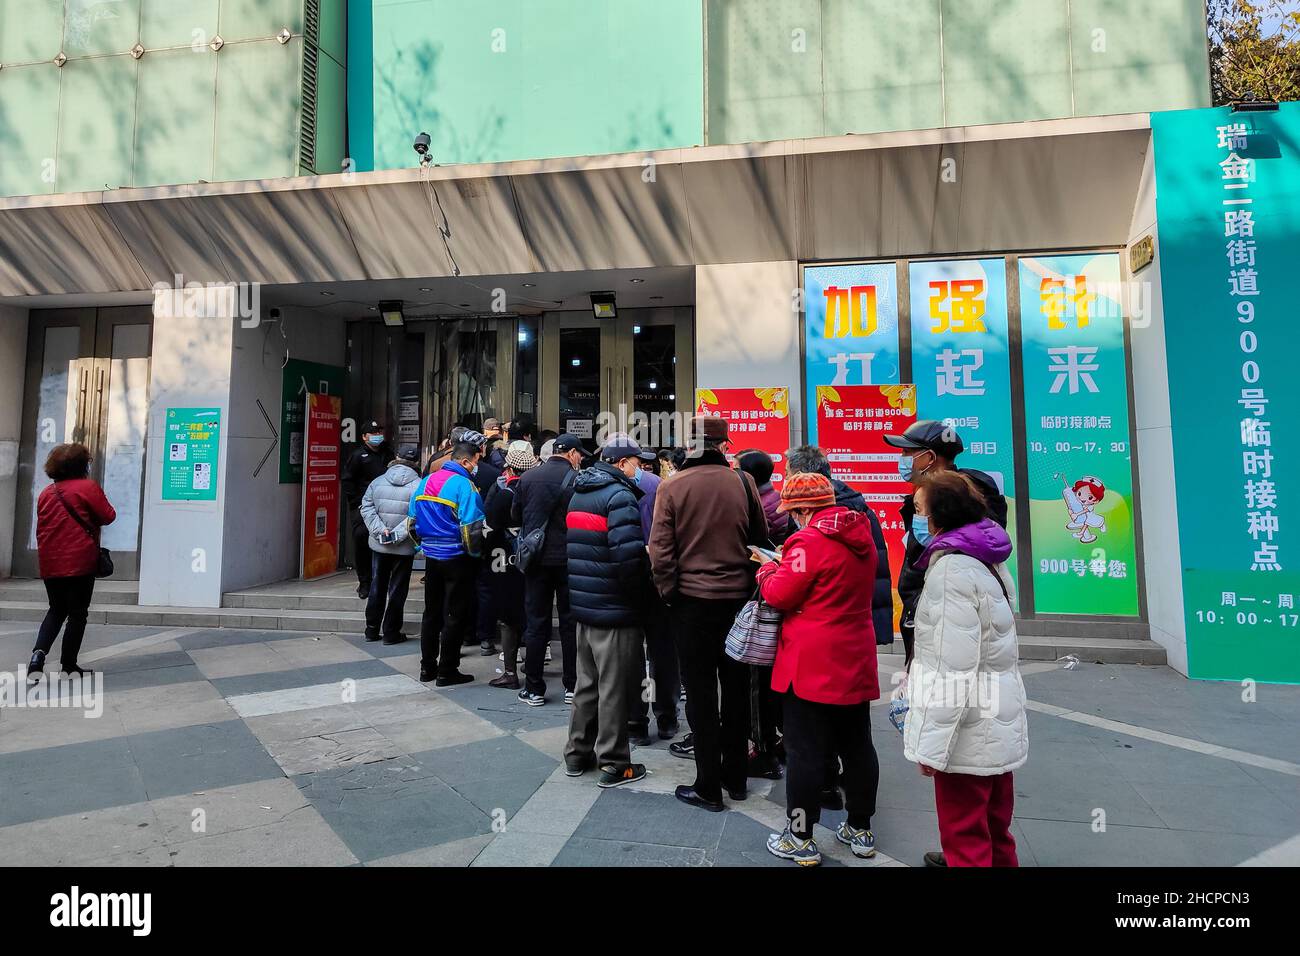 SHANGHAI, CHINA - DECEMBER 31, 2021 - People wait in a long line for COVID-19 Booster Needle in Shanghai, China, on December 31, 2021. Stock Photo